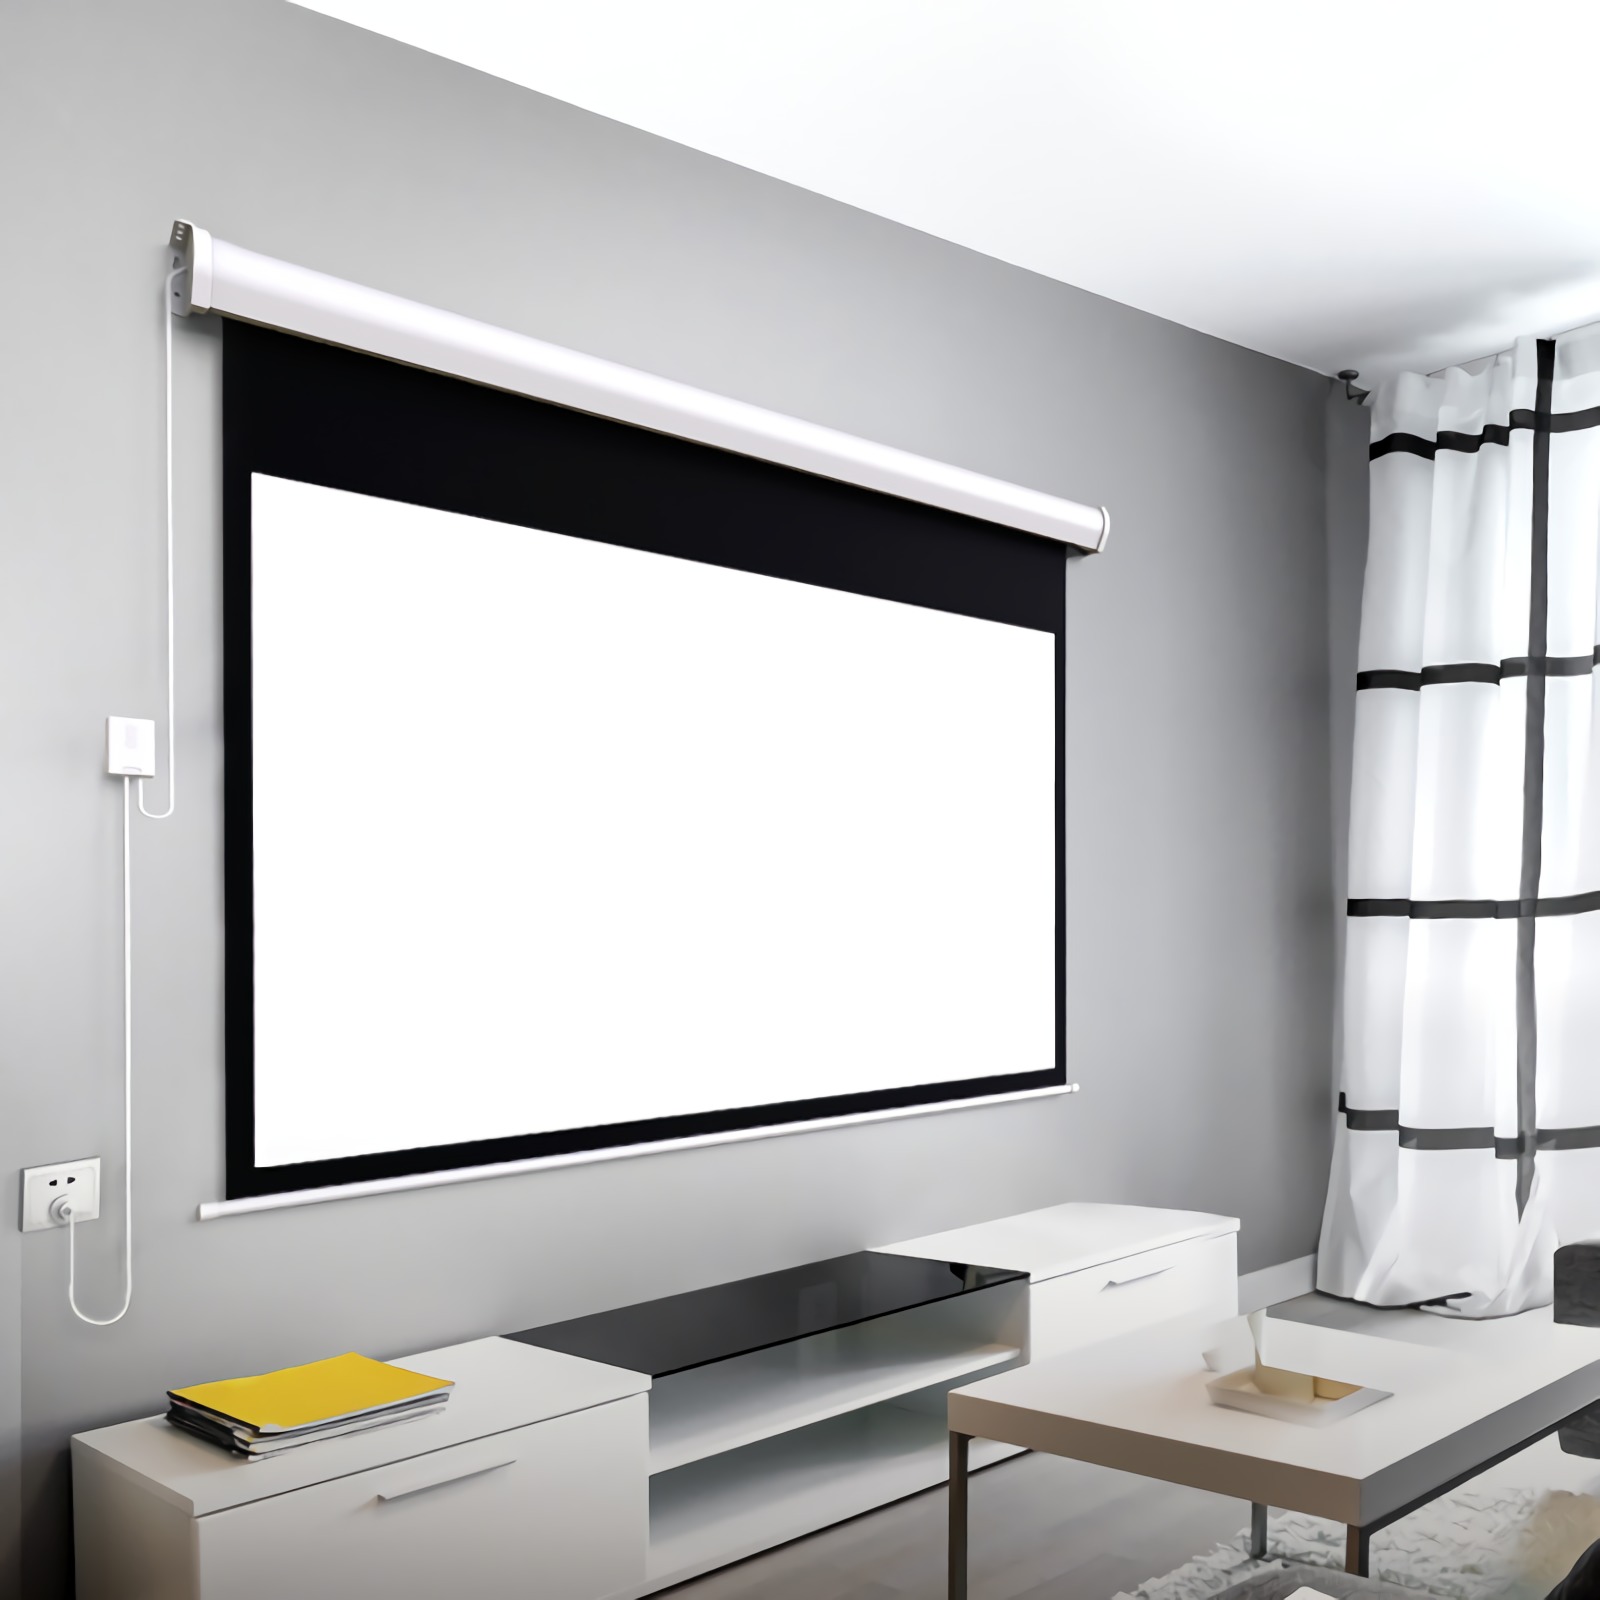 Move Over Projectors, The 100 Inch TV Is Now A Reality, by Regent5